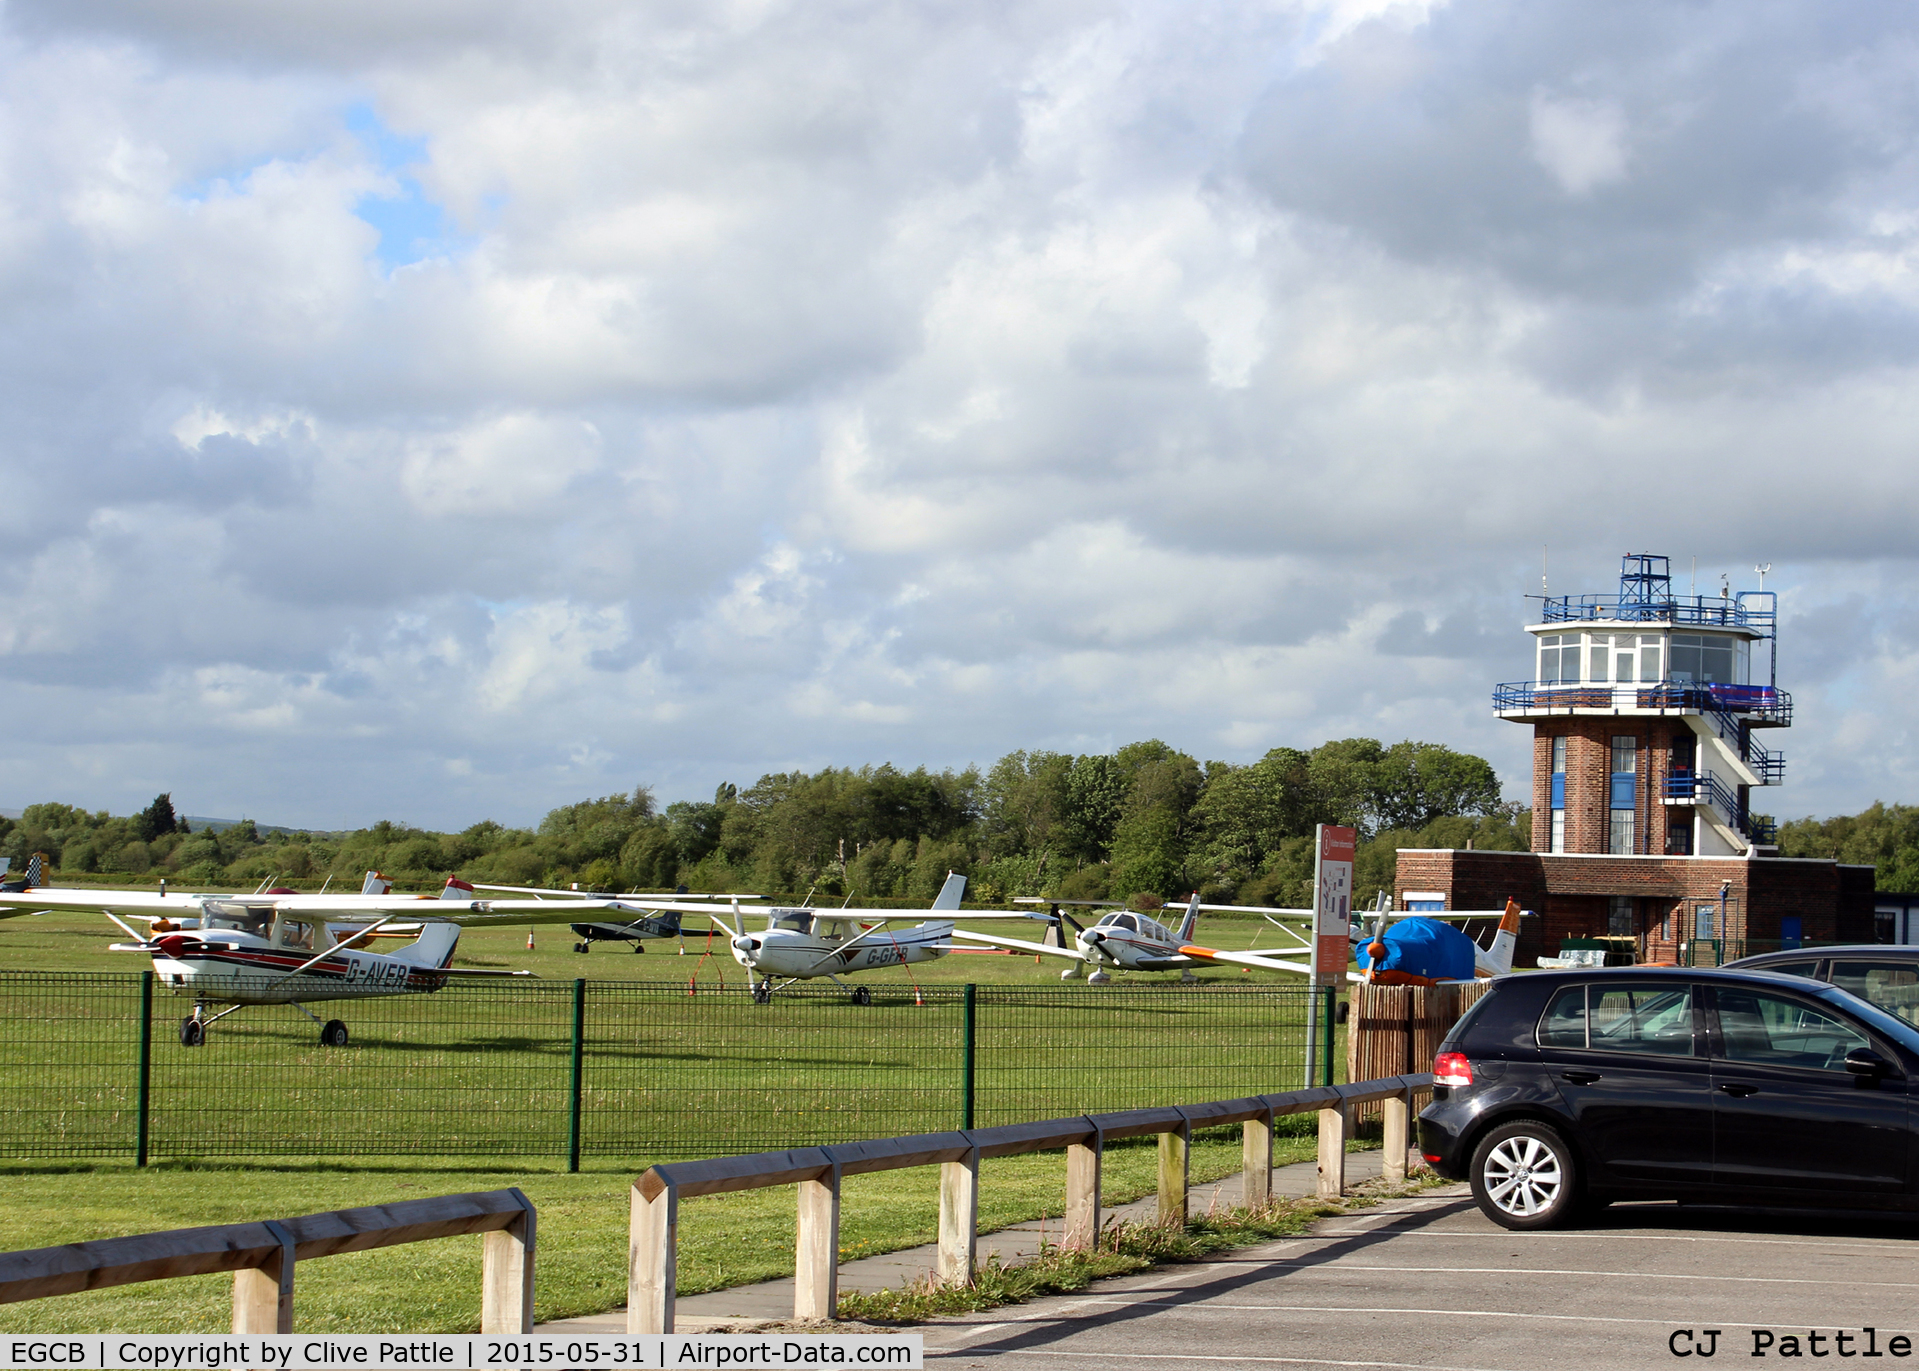 City Airport Manchester, Manchester, England United Kingdom (EGCB) - Excellent spotting access and car parking Barton, Manchester City Airport, EGCB